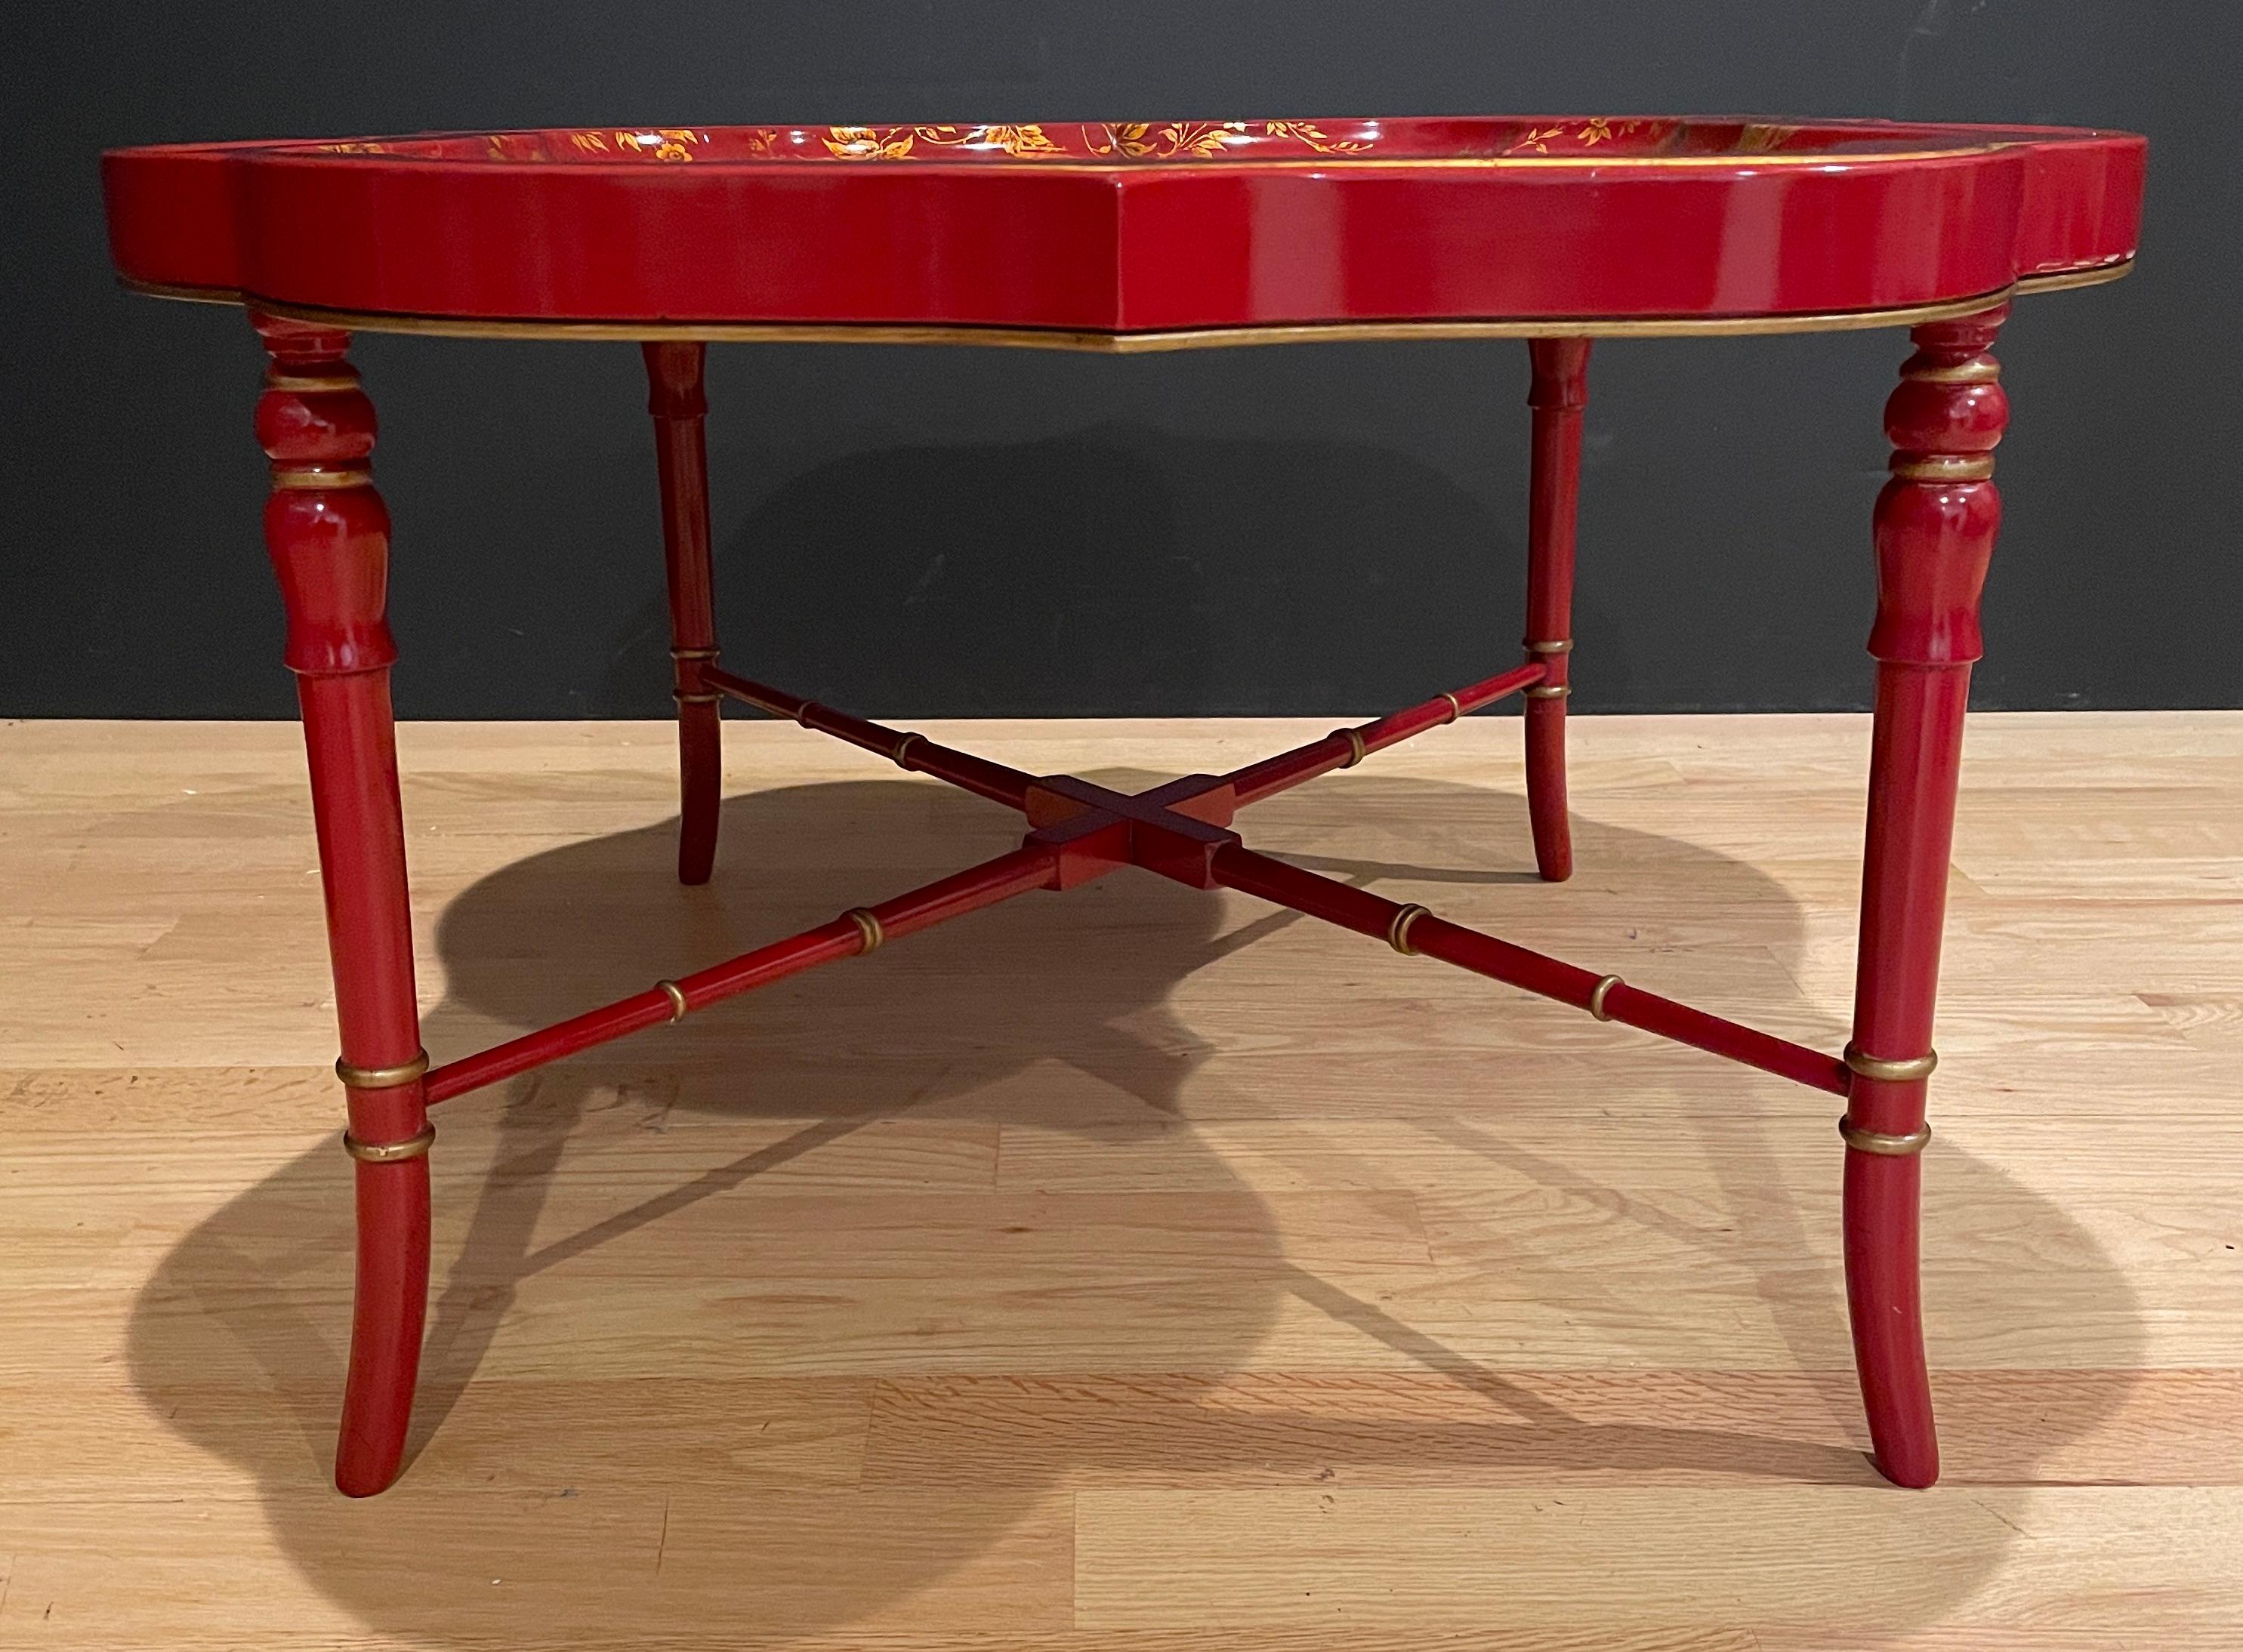 Faux Bamboo Rot Lack Chinoiserie Tablett Tisch im Zustand „Gut“ im Angebot in Norwood, NJ